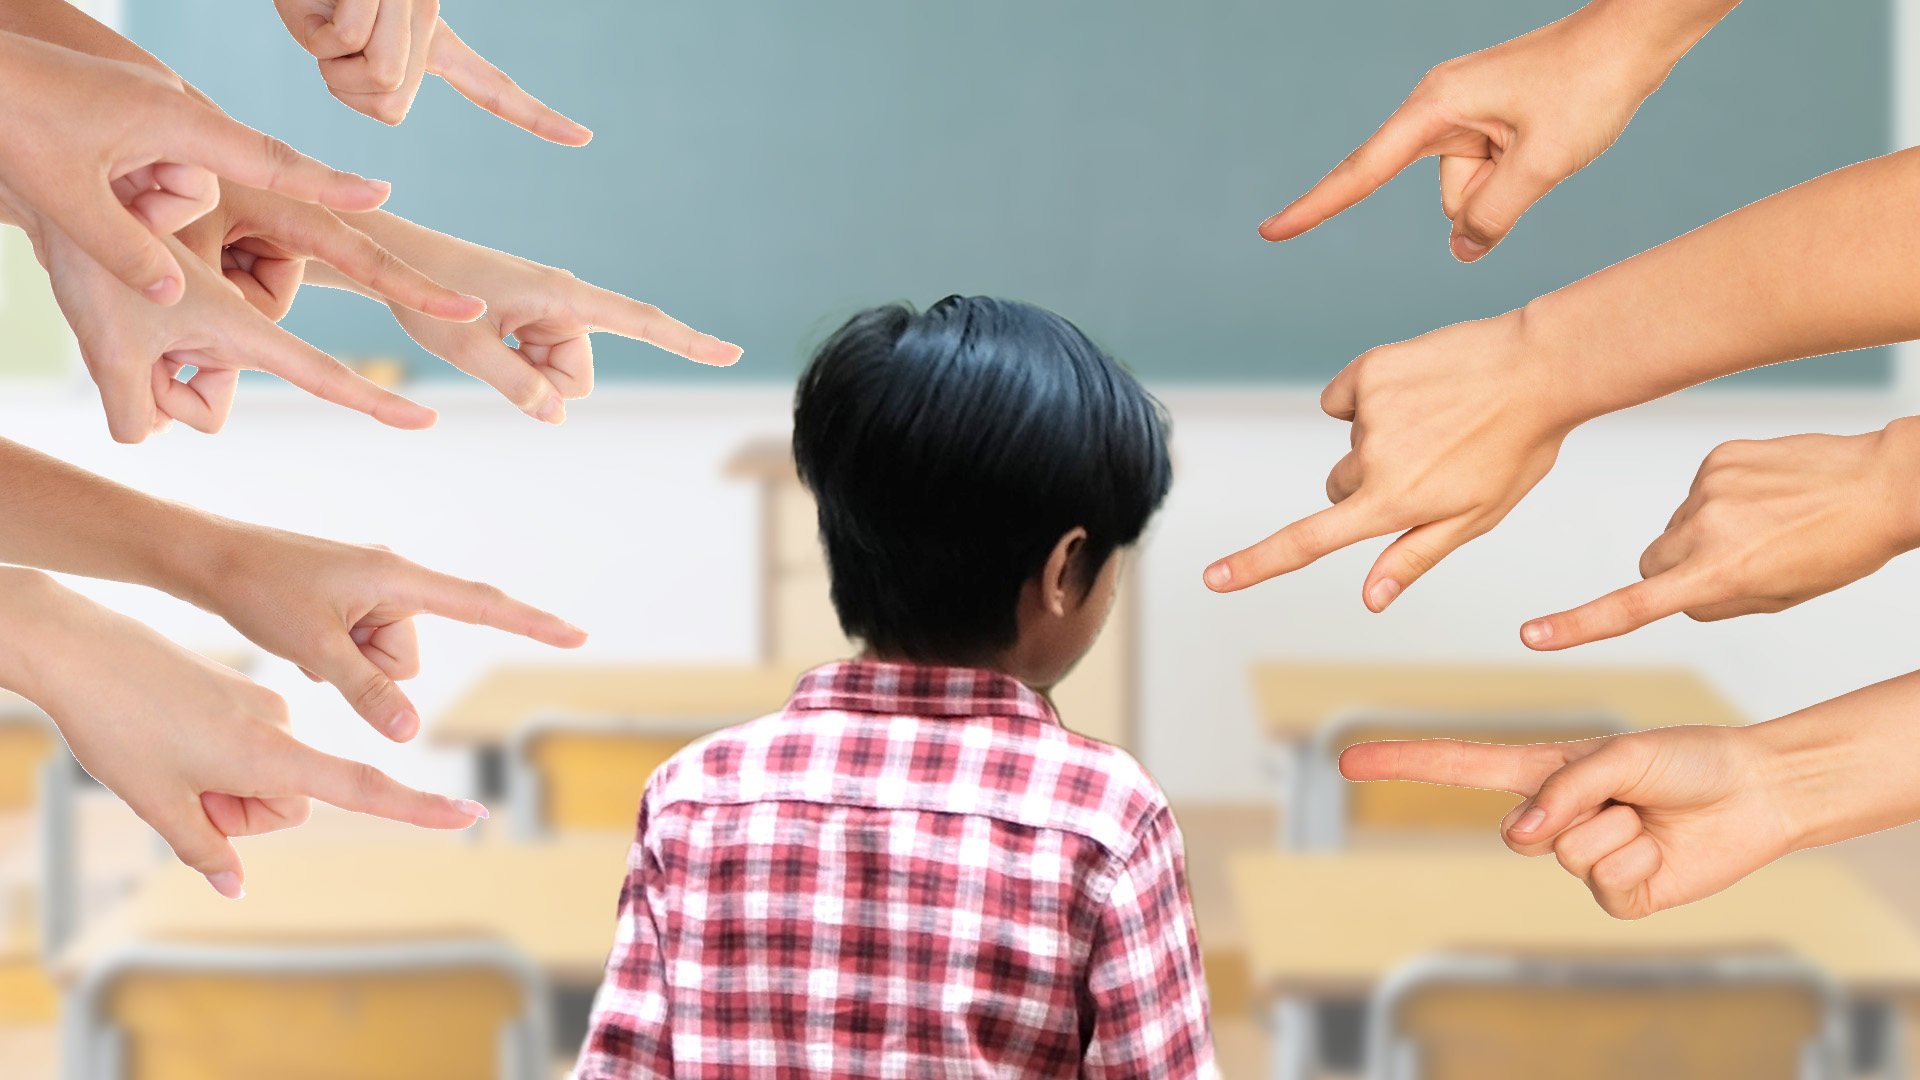 A group of parents in China has demanded that a violent and intimidating seven-year-old boy be removed from their children’s class after a string of bullying incidents. Photo: SCMP composite/Shutterstock